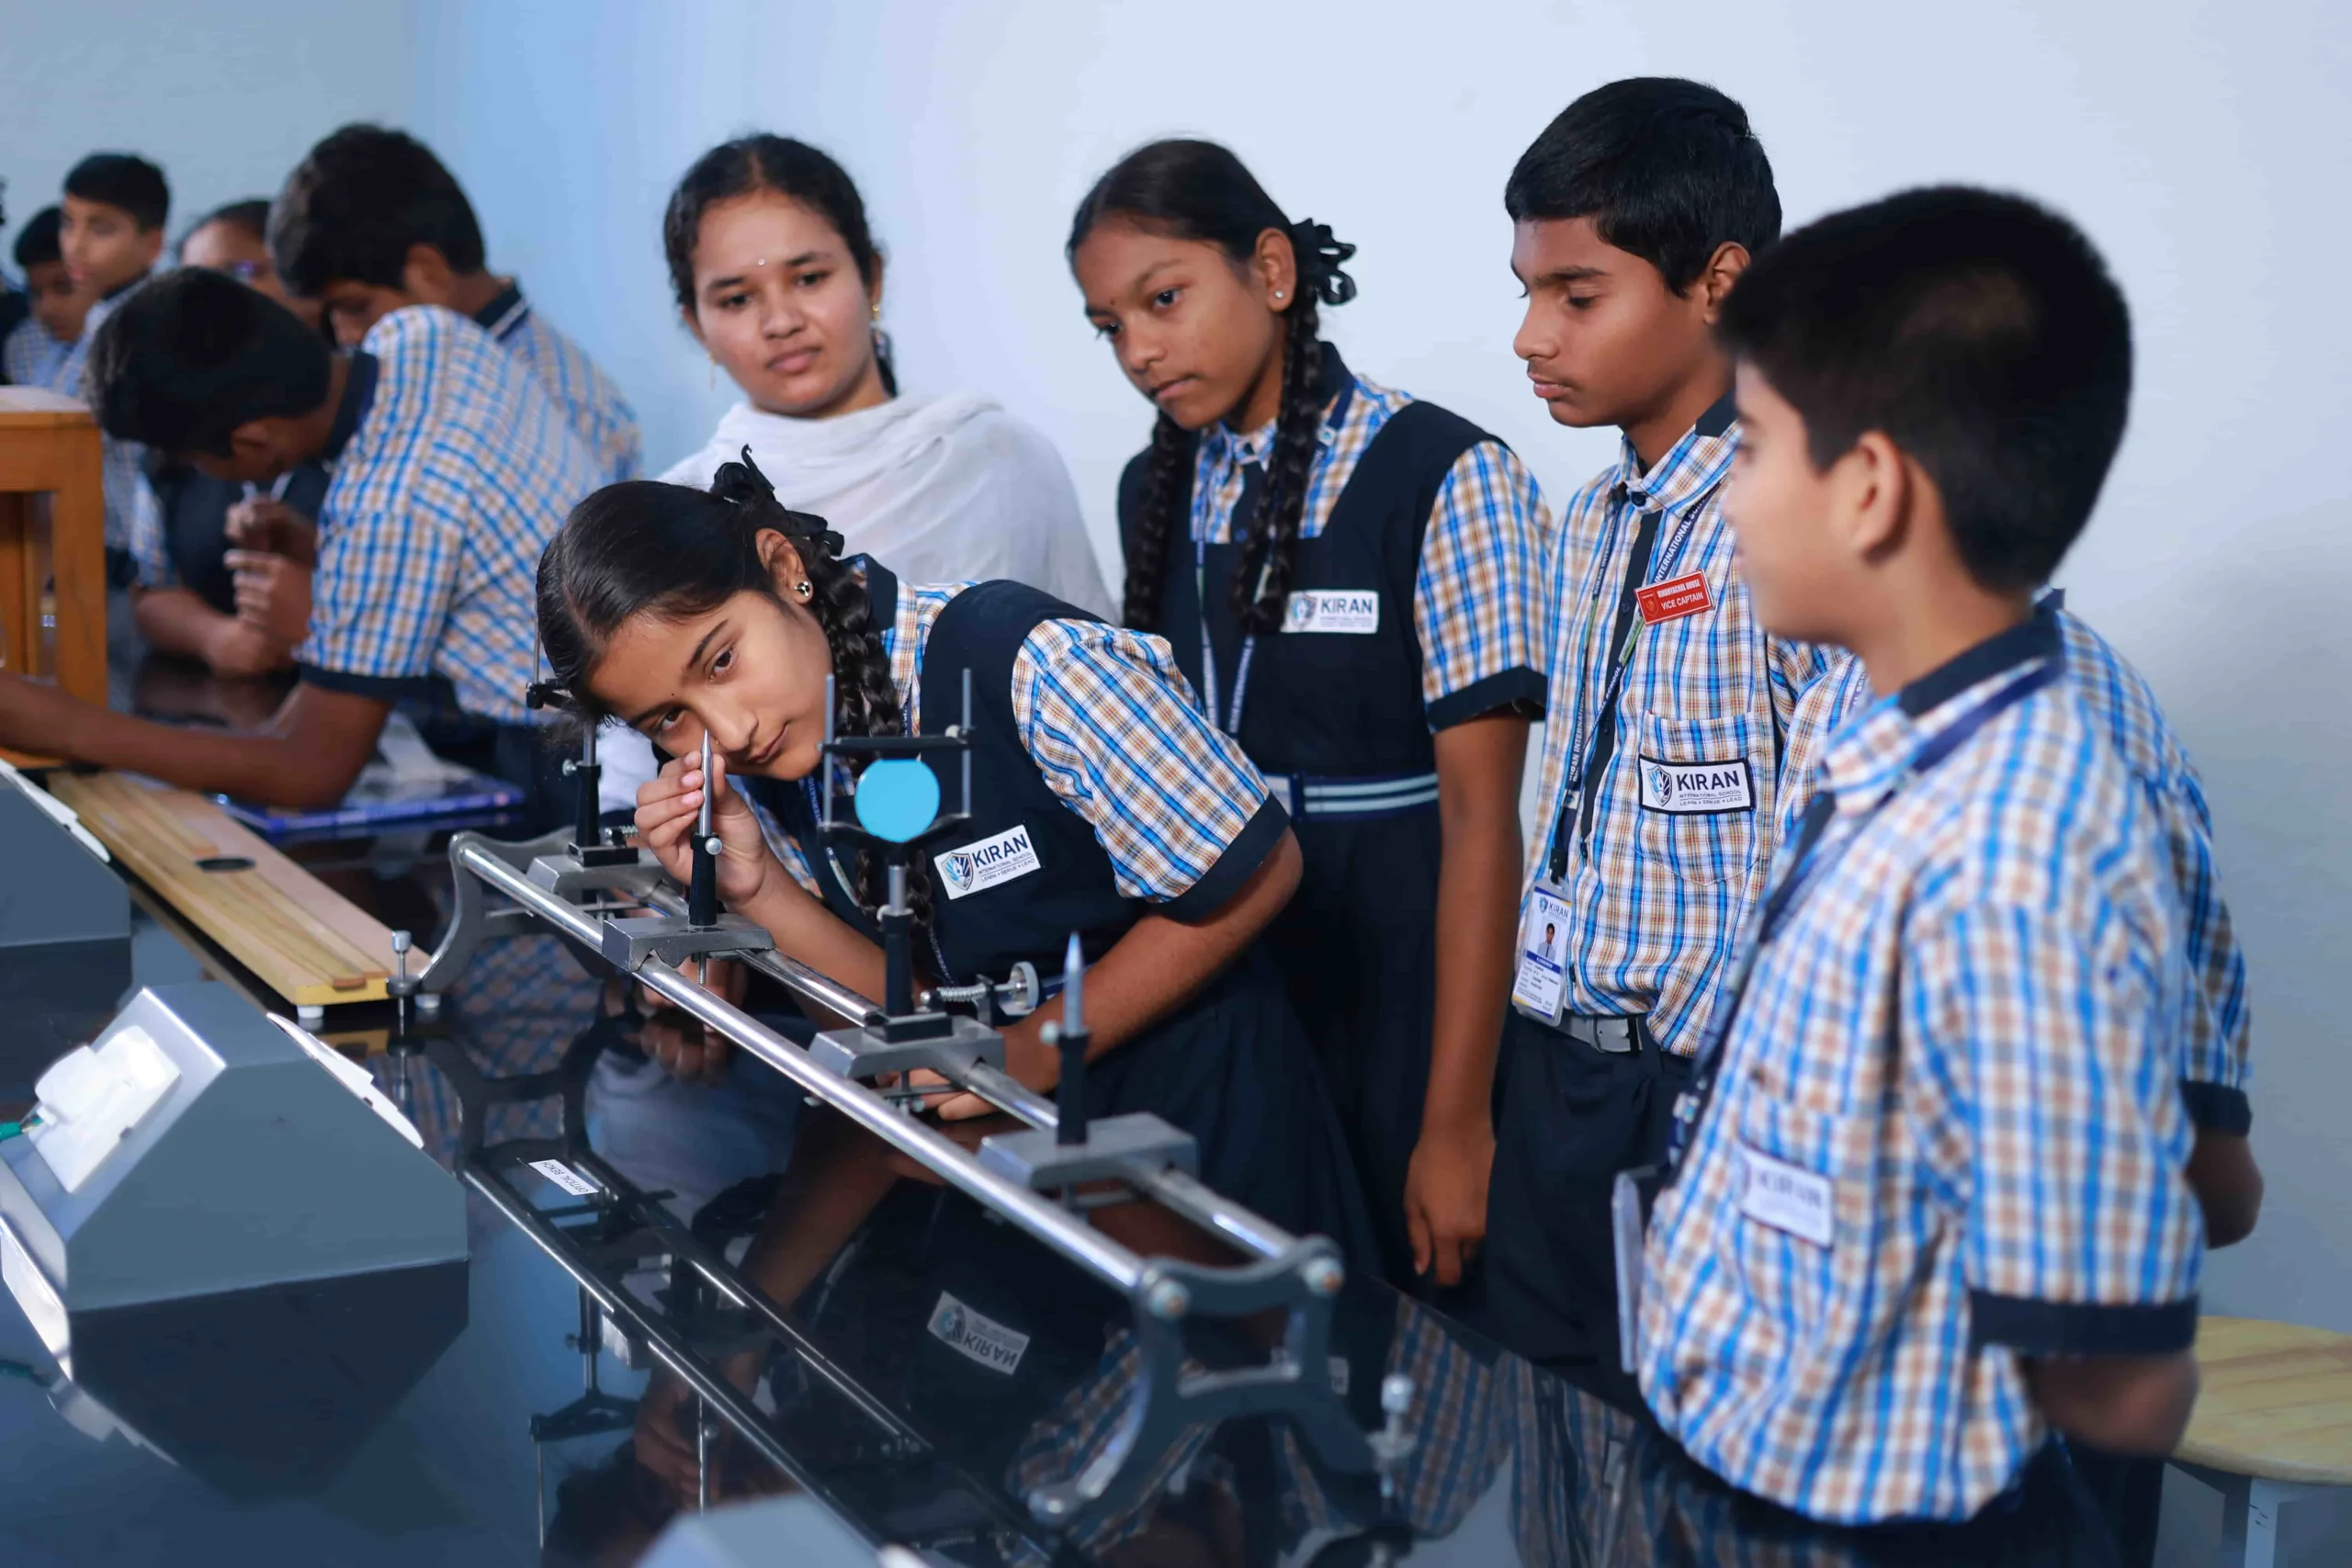 Students engaged in a science practical session under the supervision of a teacher at Kiran International School, fostering hands-on learning and scientific exploration.